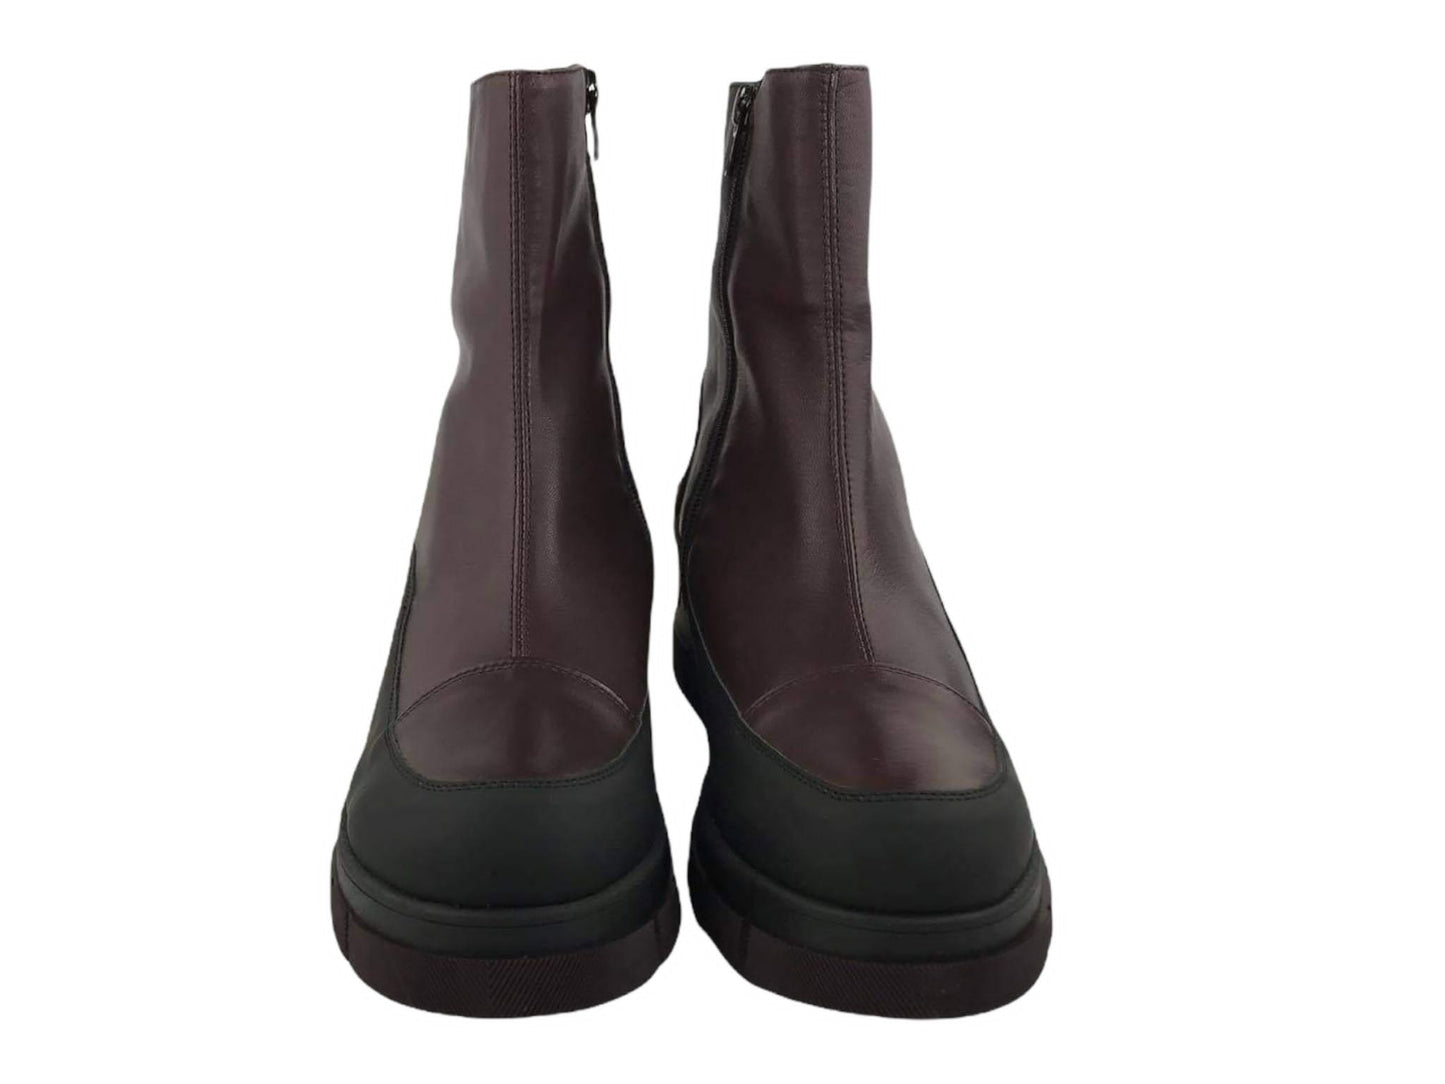 Commart | Women's flat ankle boots with zipper and burgundy platform Leila